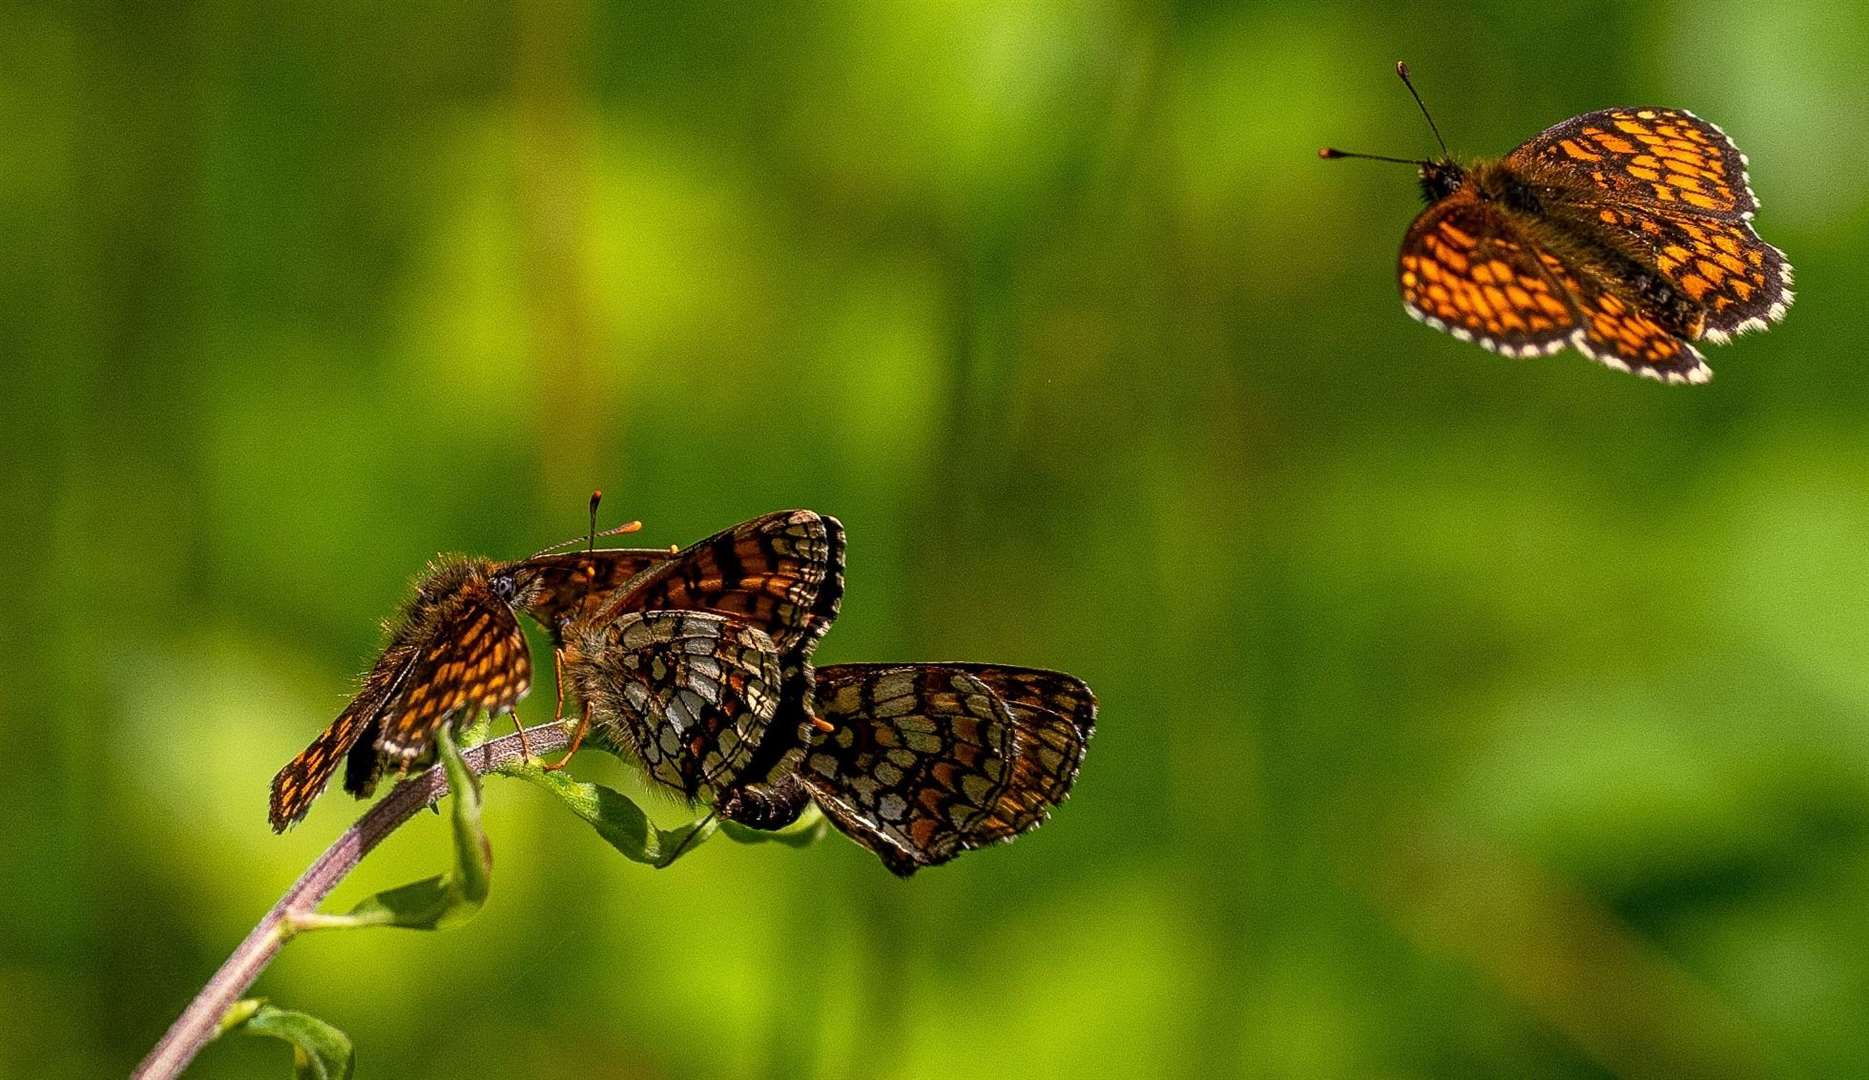 The Heath Fritillary is one of Britain's most threatened butterfly species